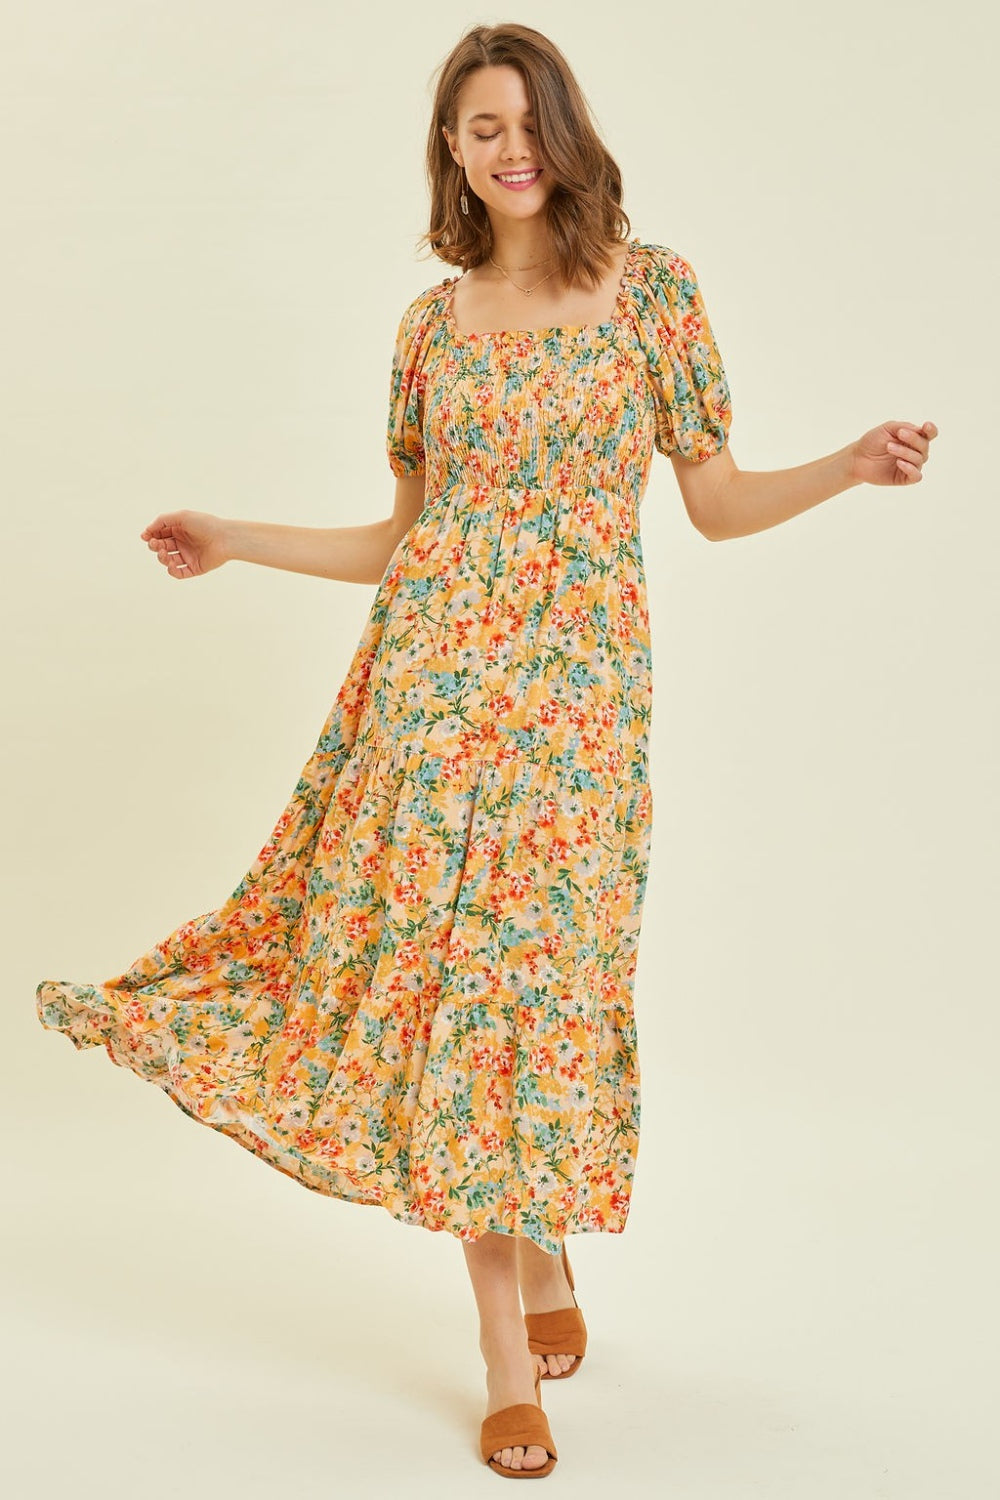 For the Thrills Floral Smocked Tiered Midi Dress